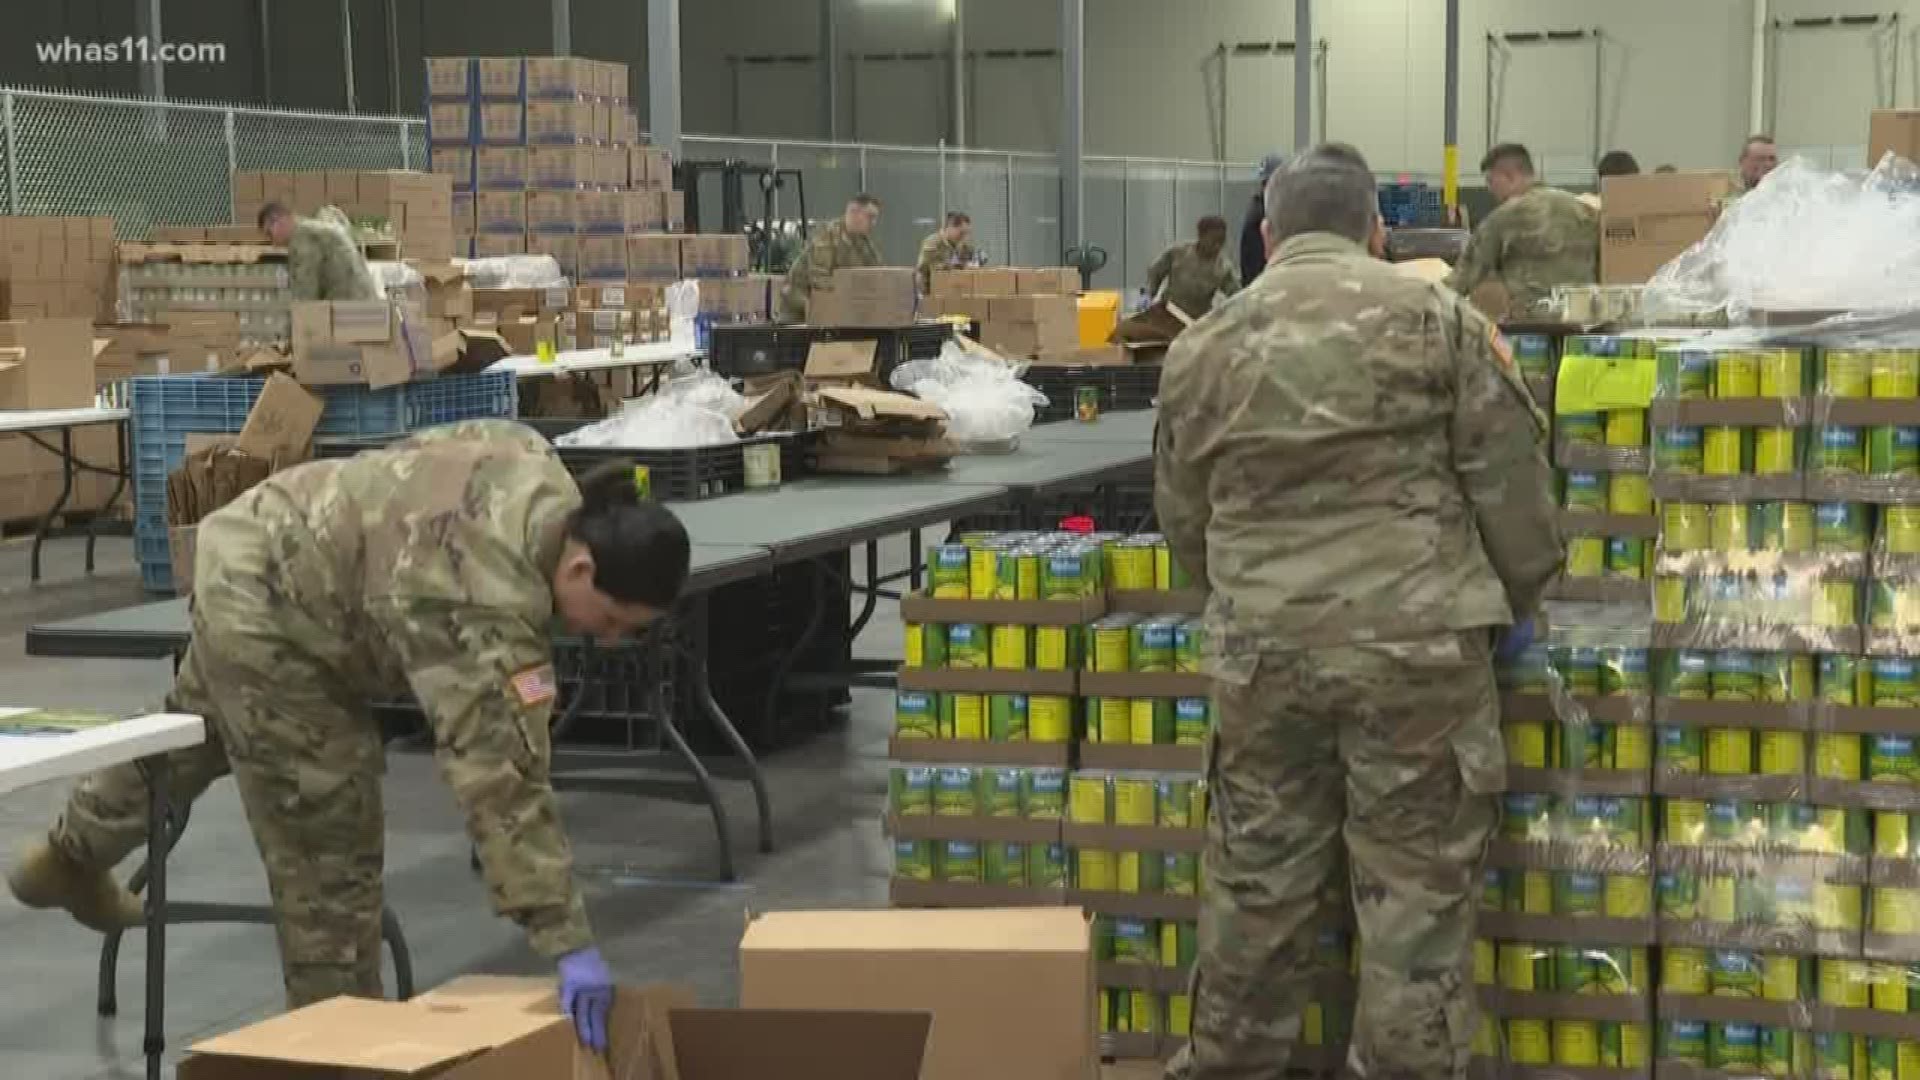 To address the increased need of food for Kentuckians, Governor Andy Beshear has deployed the National Guard to help food banks.